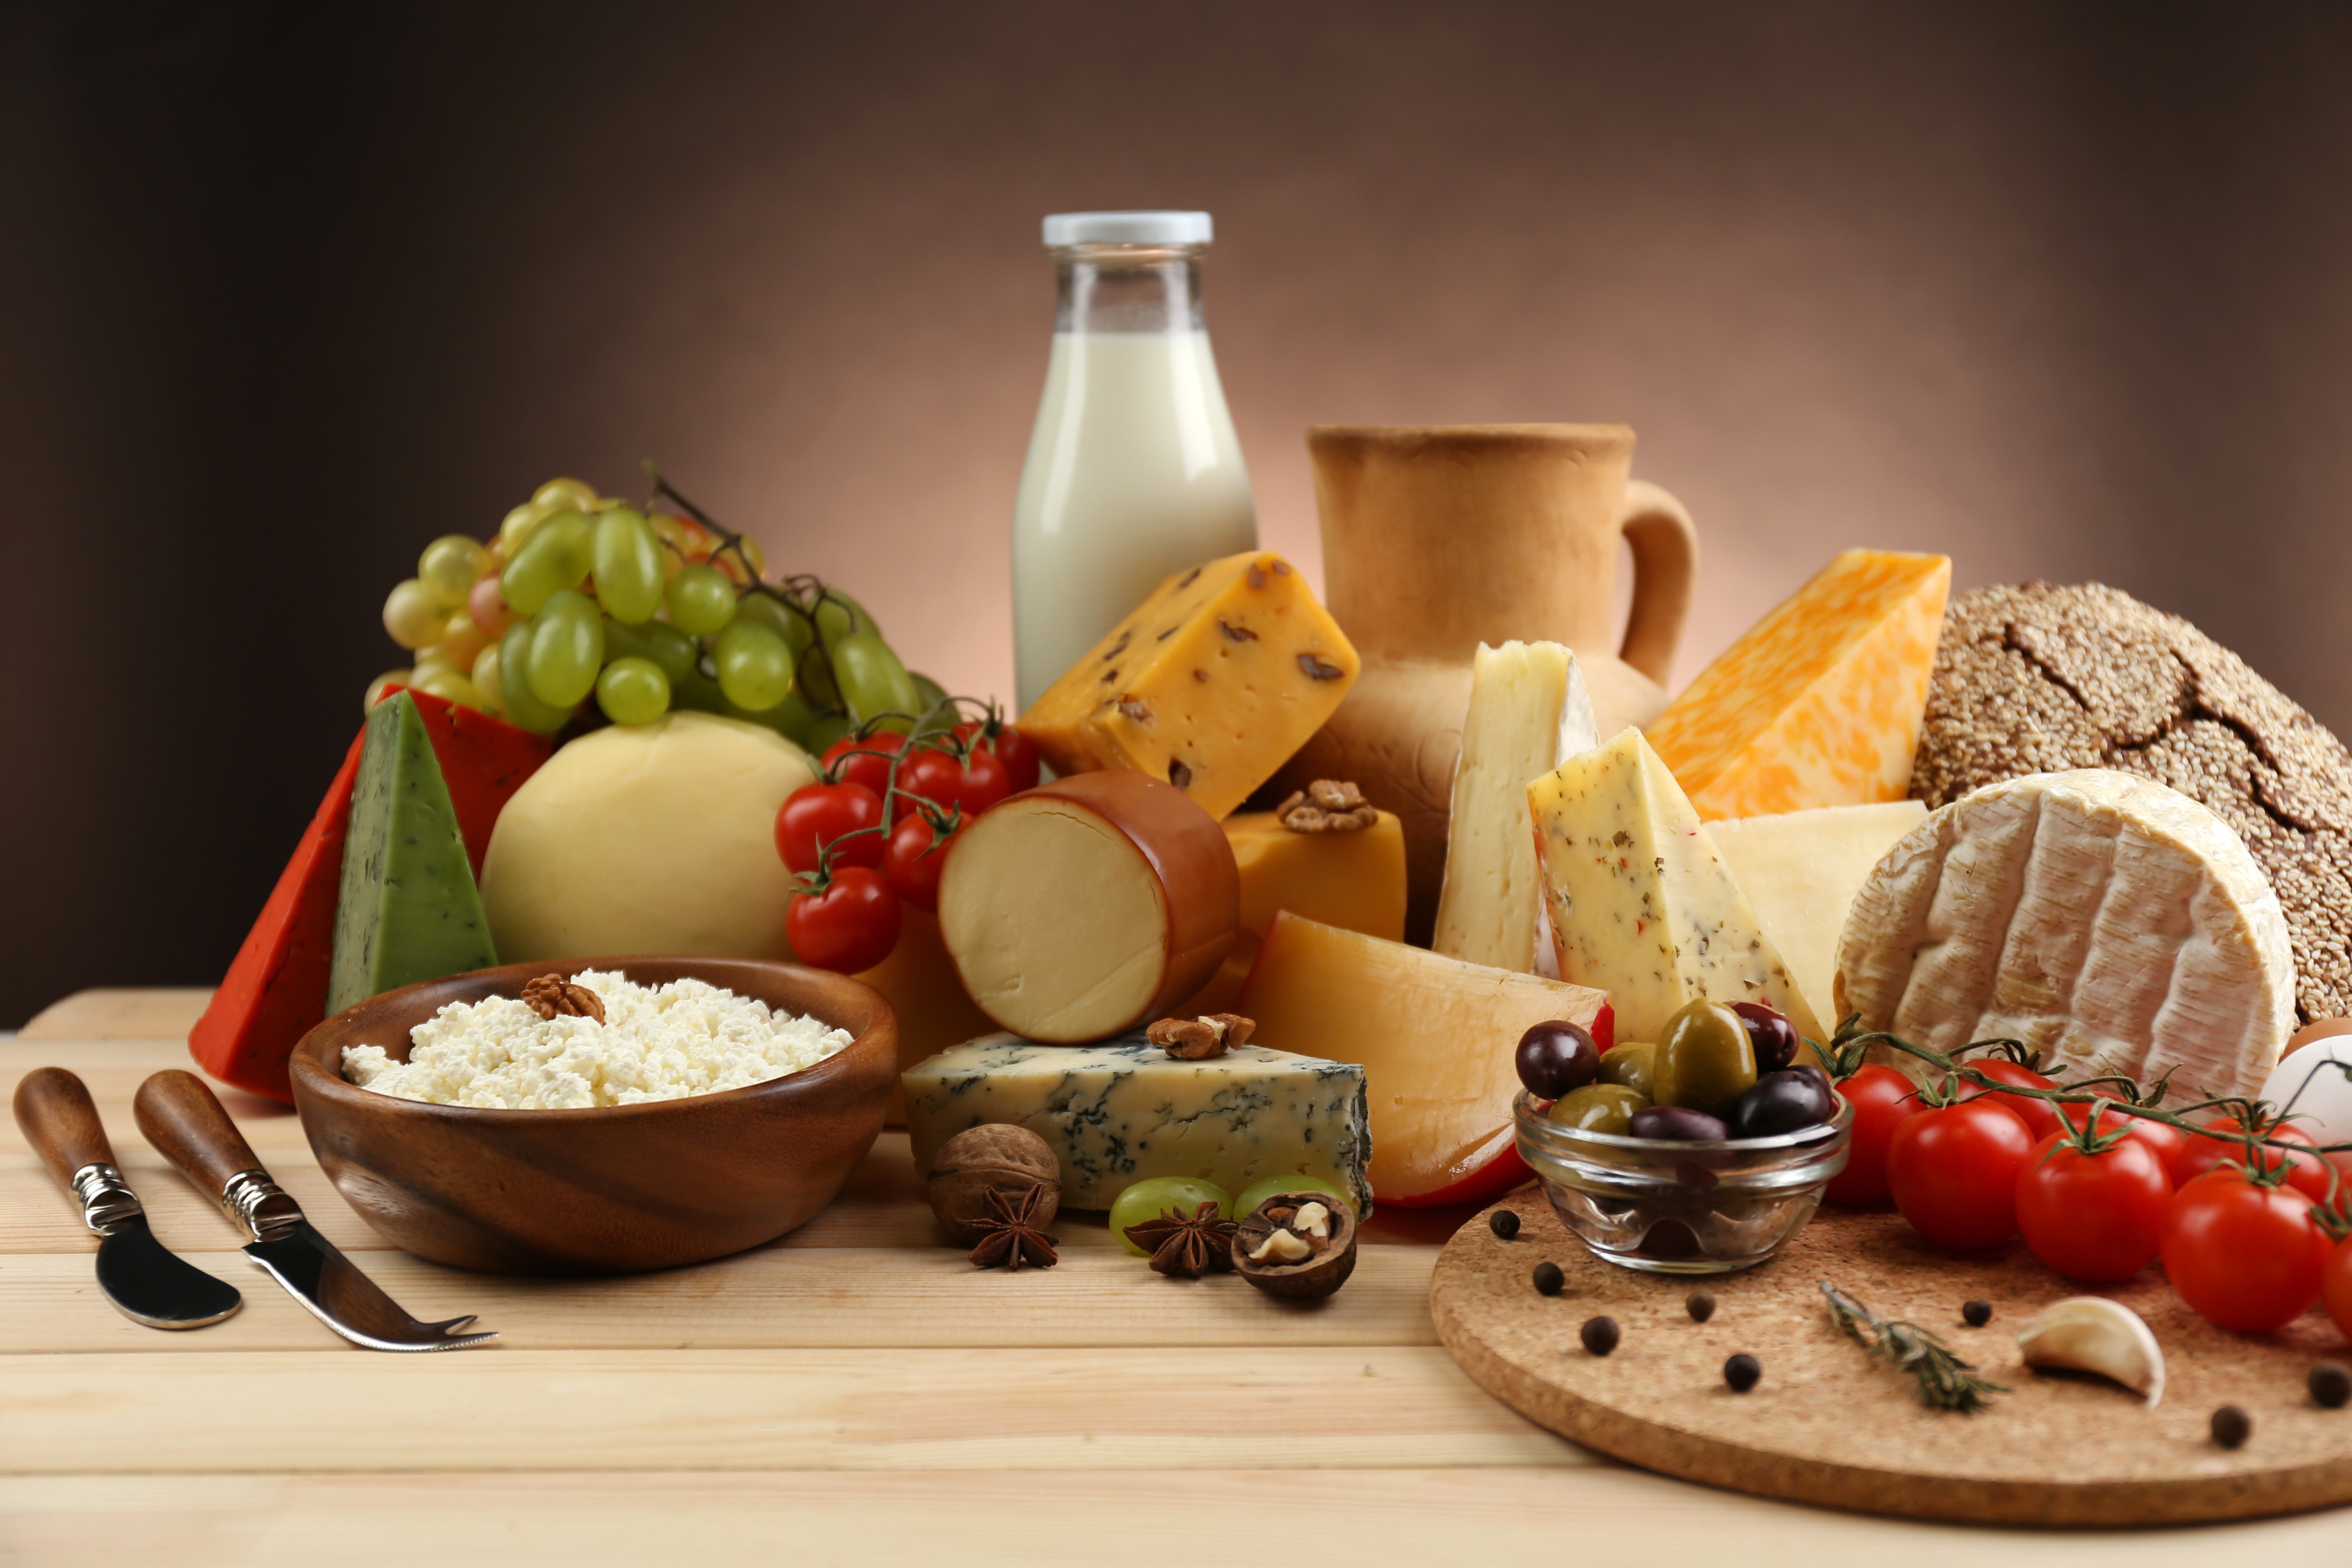 General 5472x3648 food still life cheese tomatoes milk grapes nuts berries fruit bread